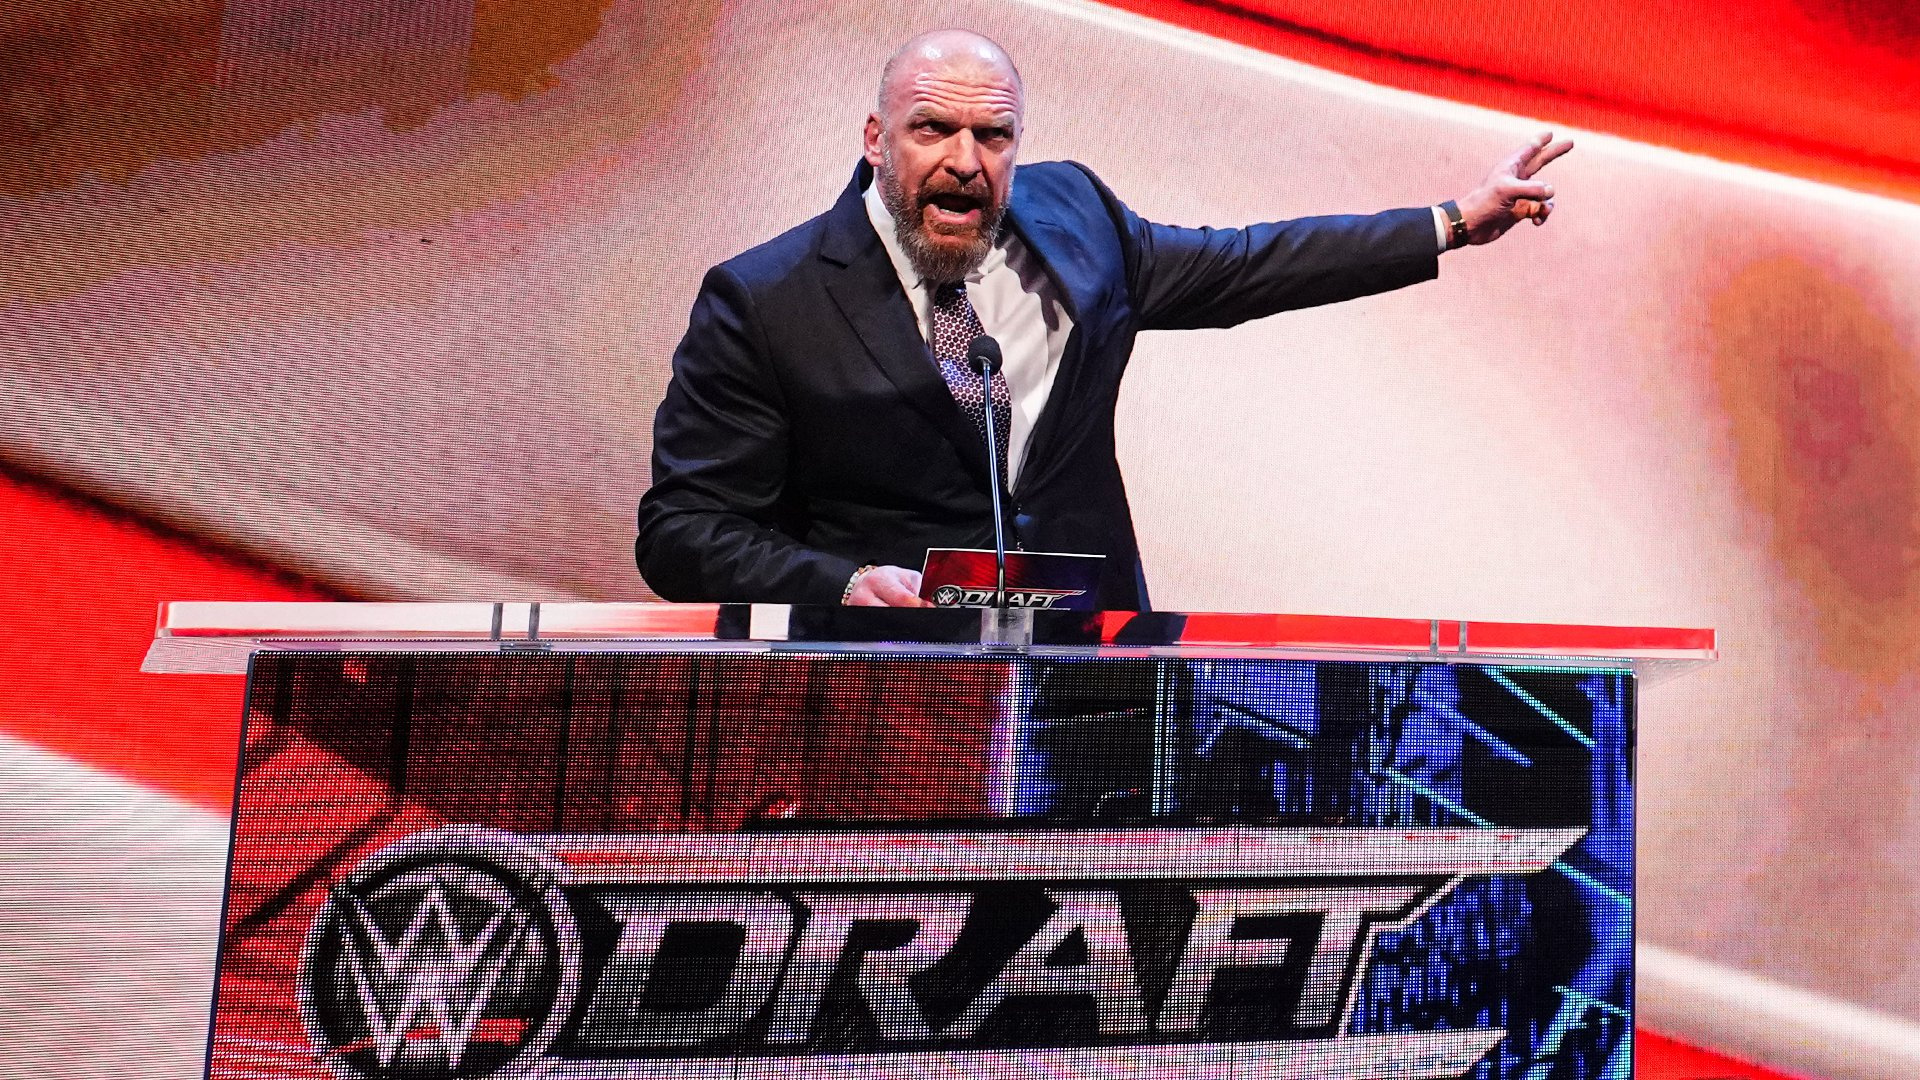 WWE Draft Scheduled to Occur Within the Next Month, Confirms Triple H